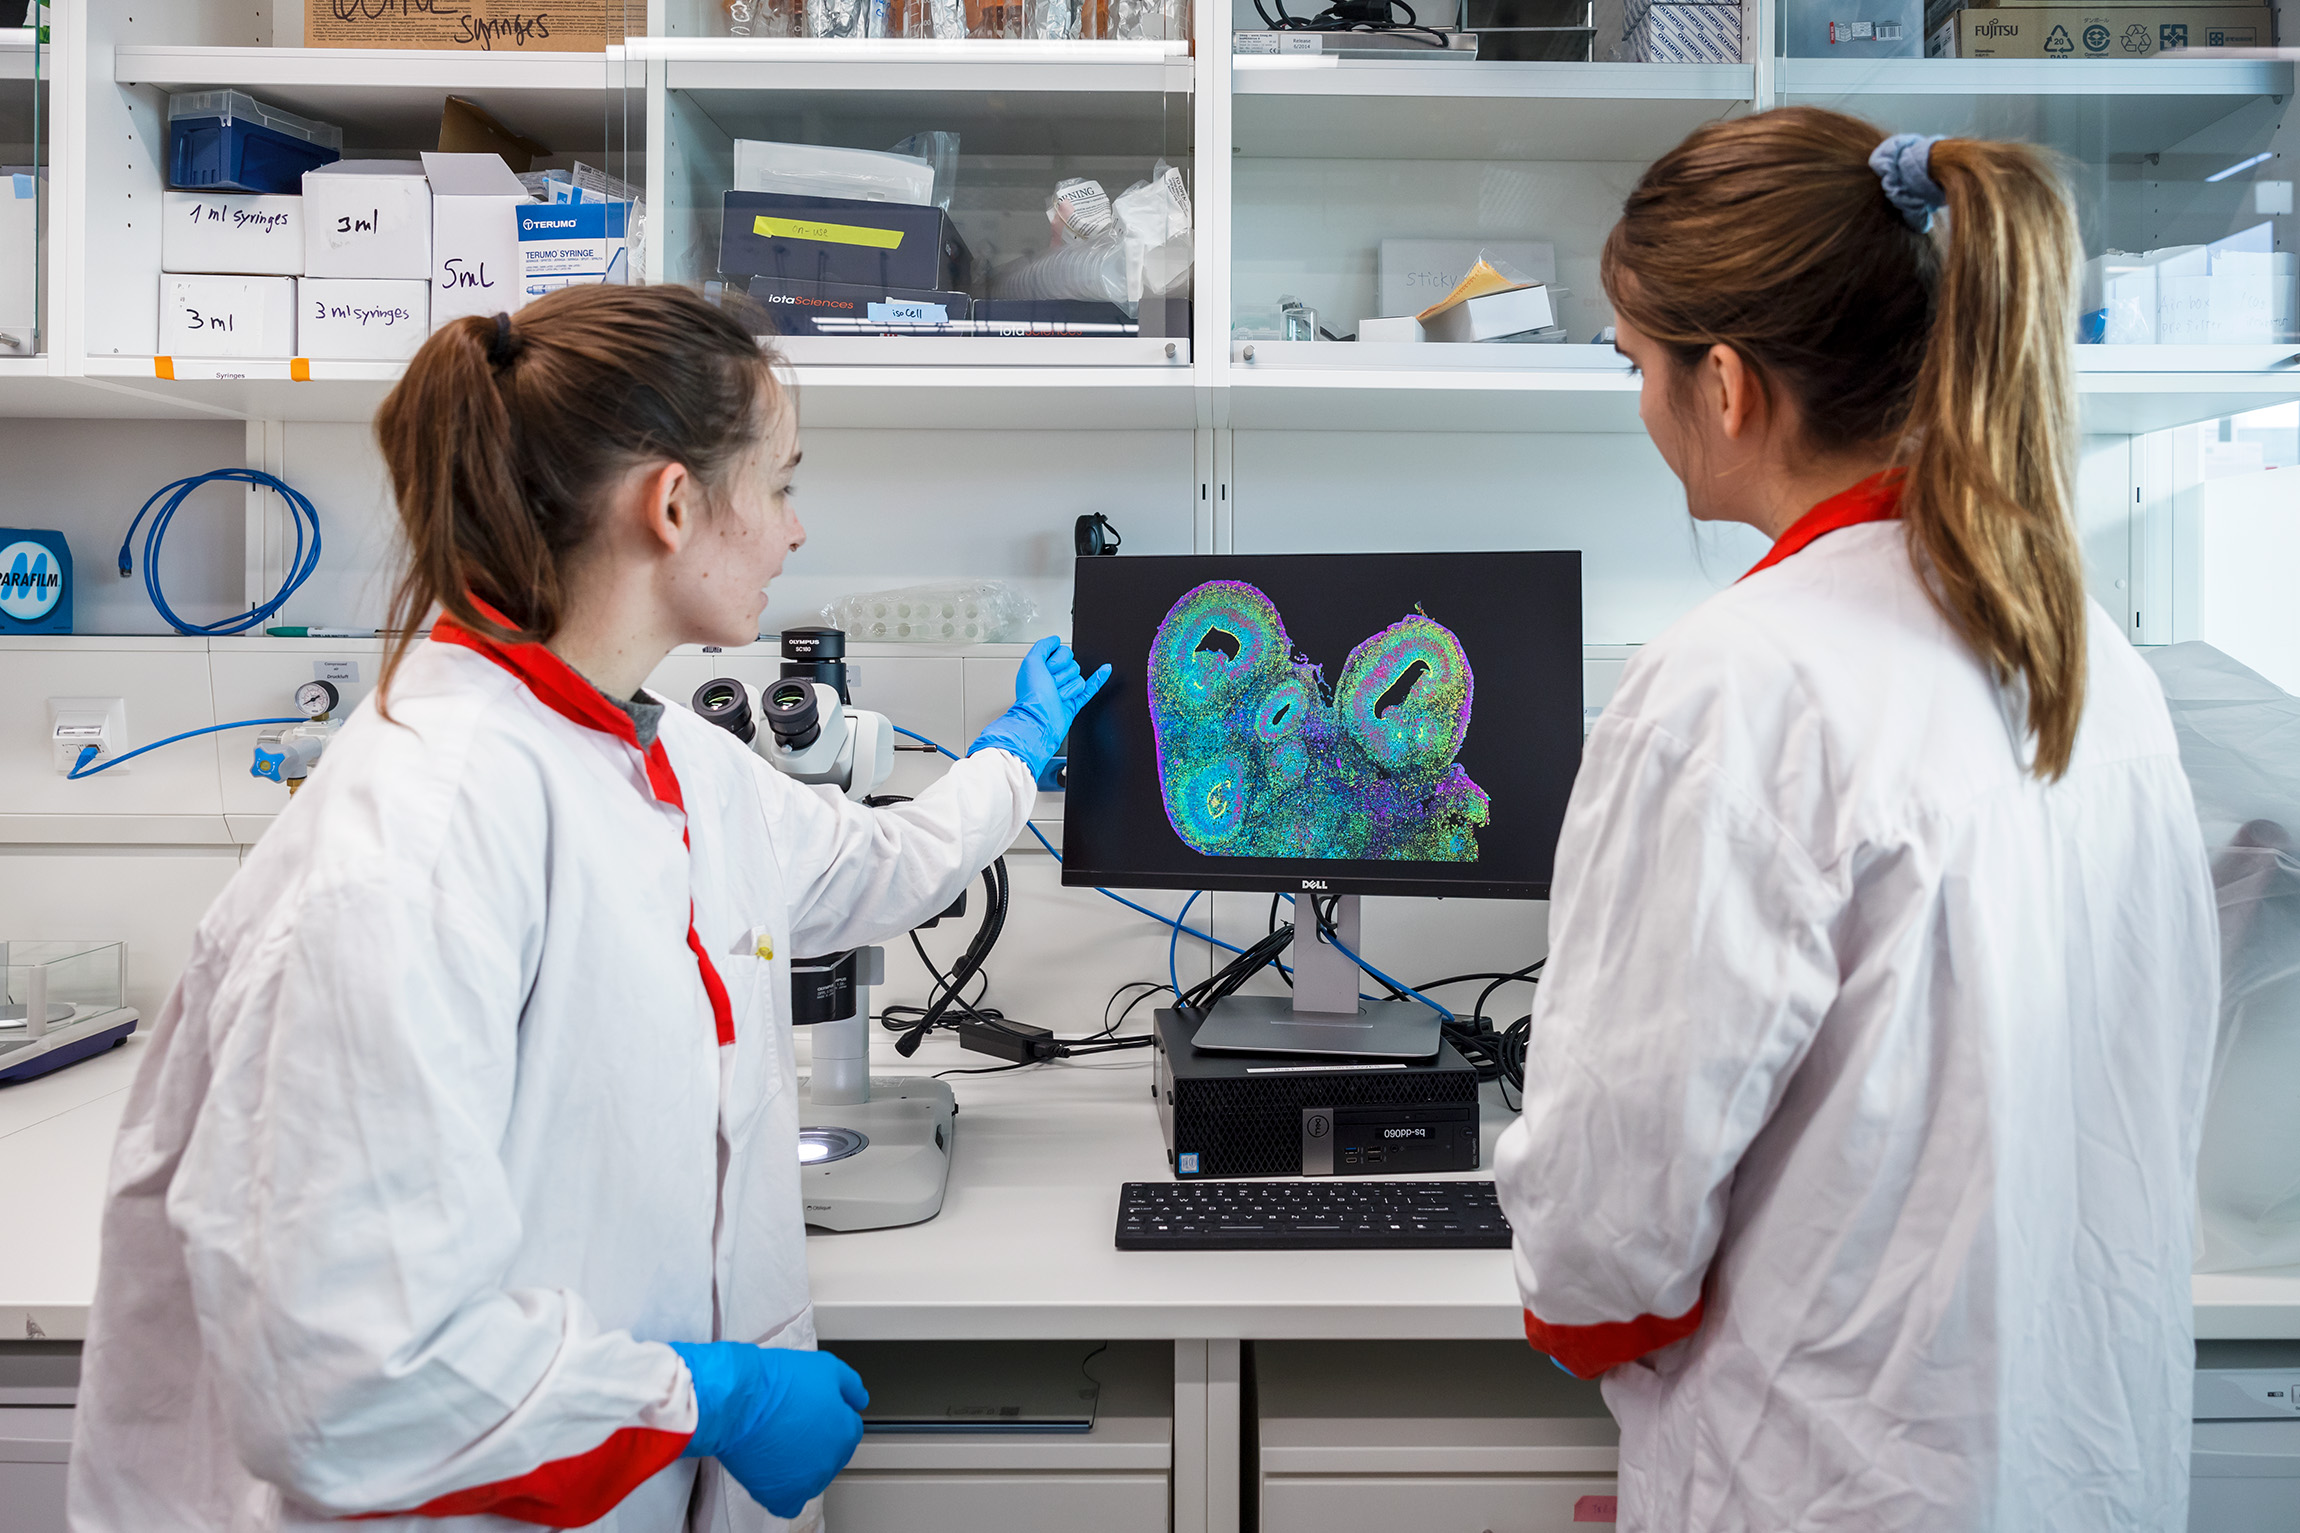 Two women in lab coats are looking at something on a screen in the lab.